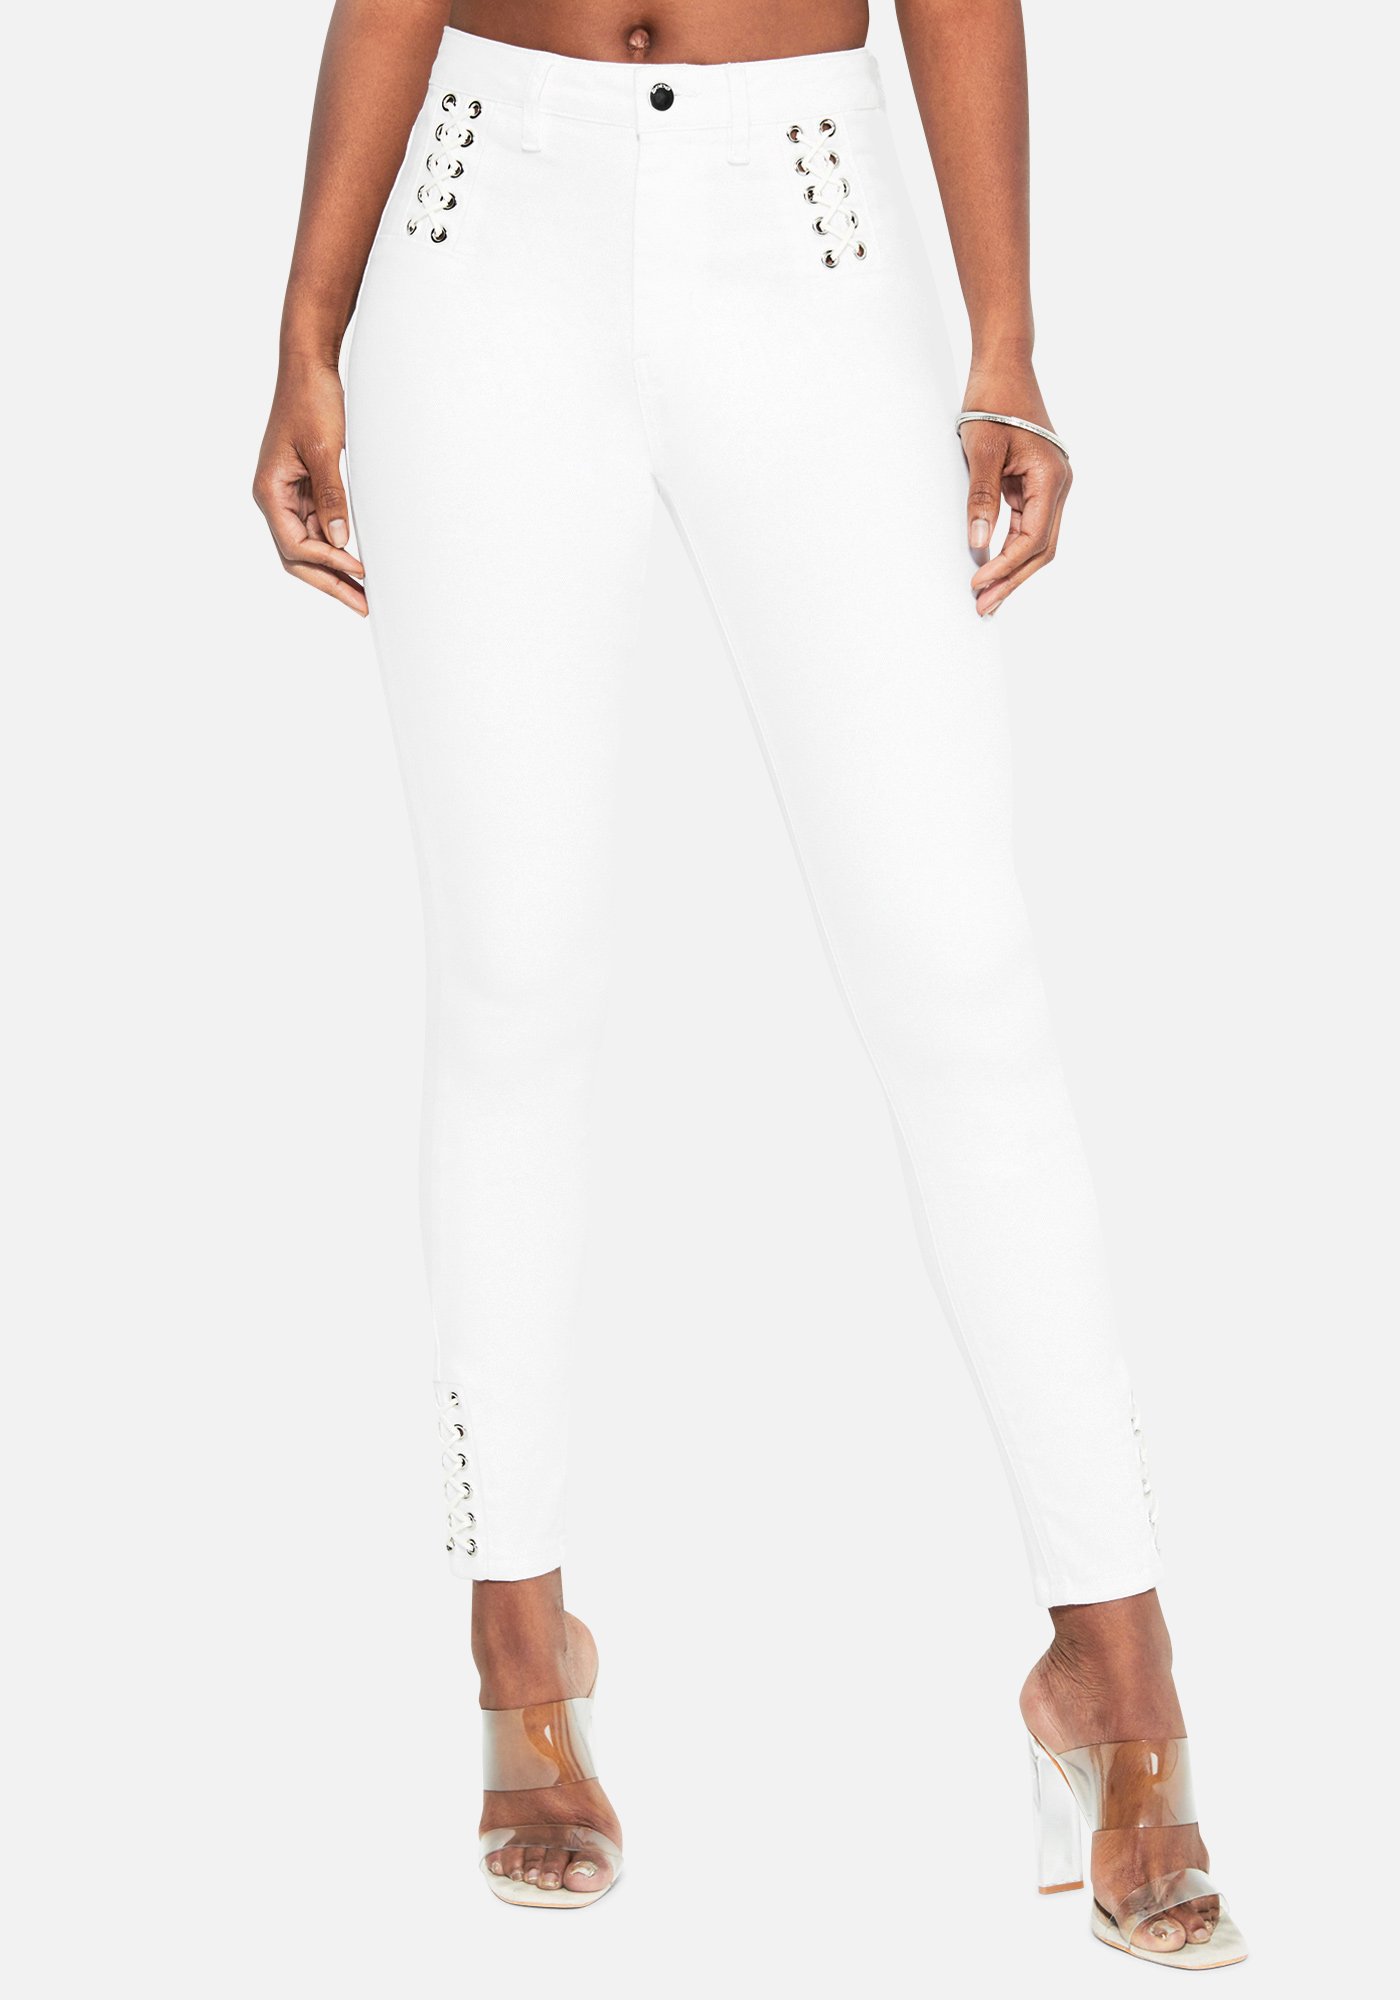 Bebe Women's Lace Detail Skinny Jeans, Size 32 in WHITE Cotton/Spandex